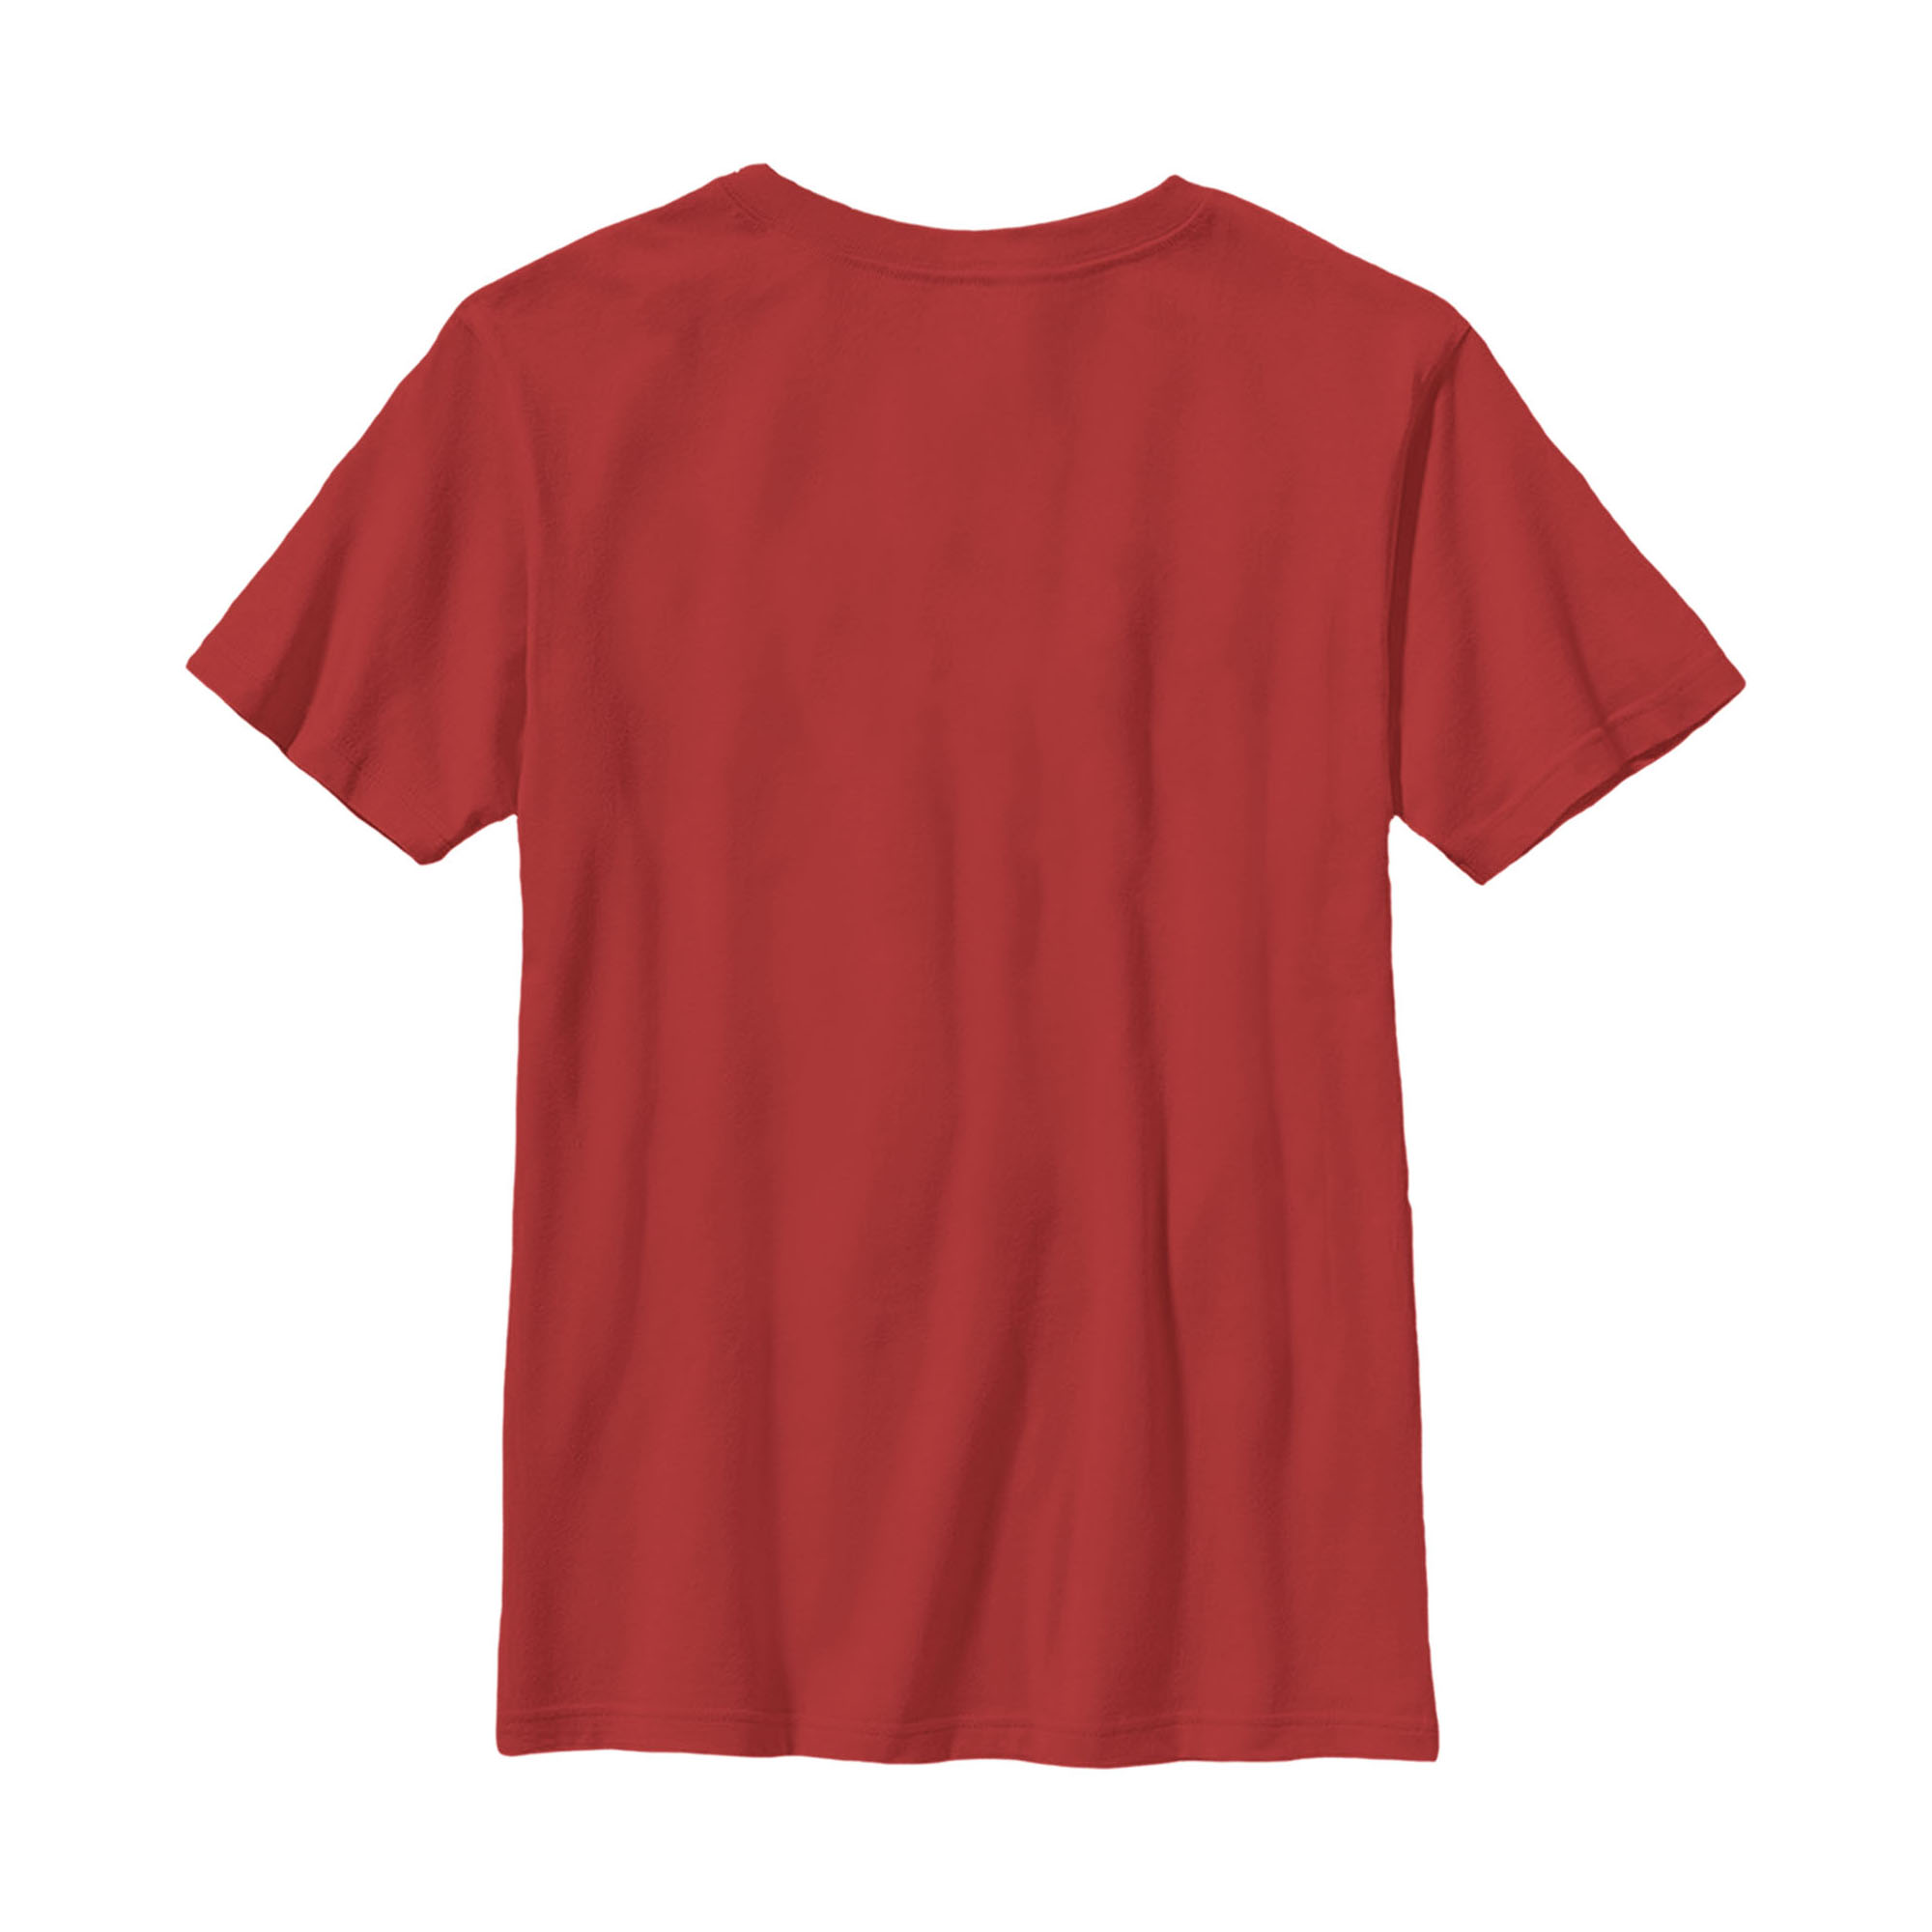 Boy's The Flash Classic Logo  Graphic Tee Red X Large - image 2 of 3